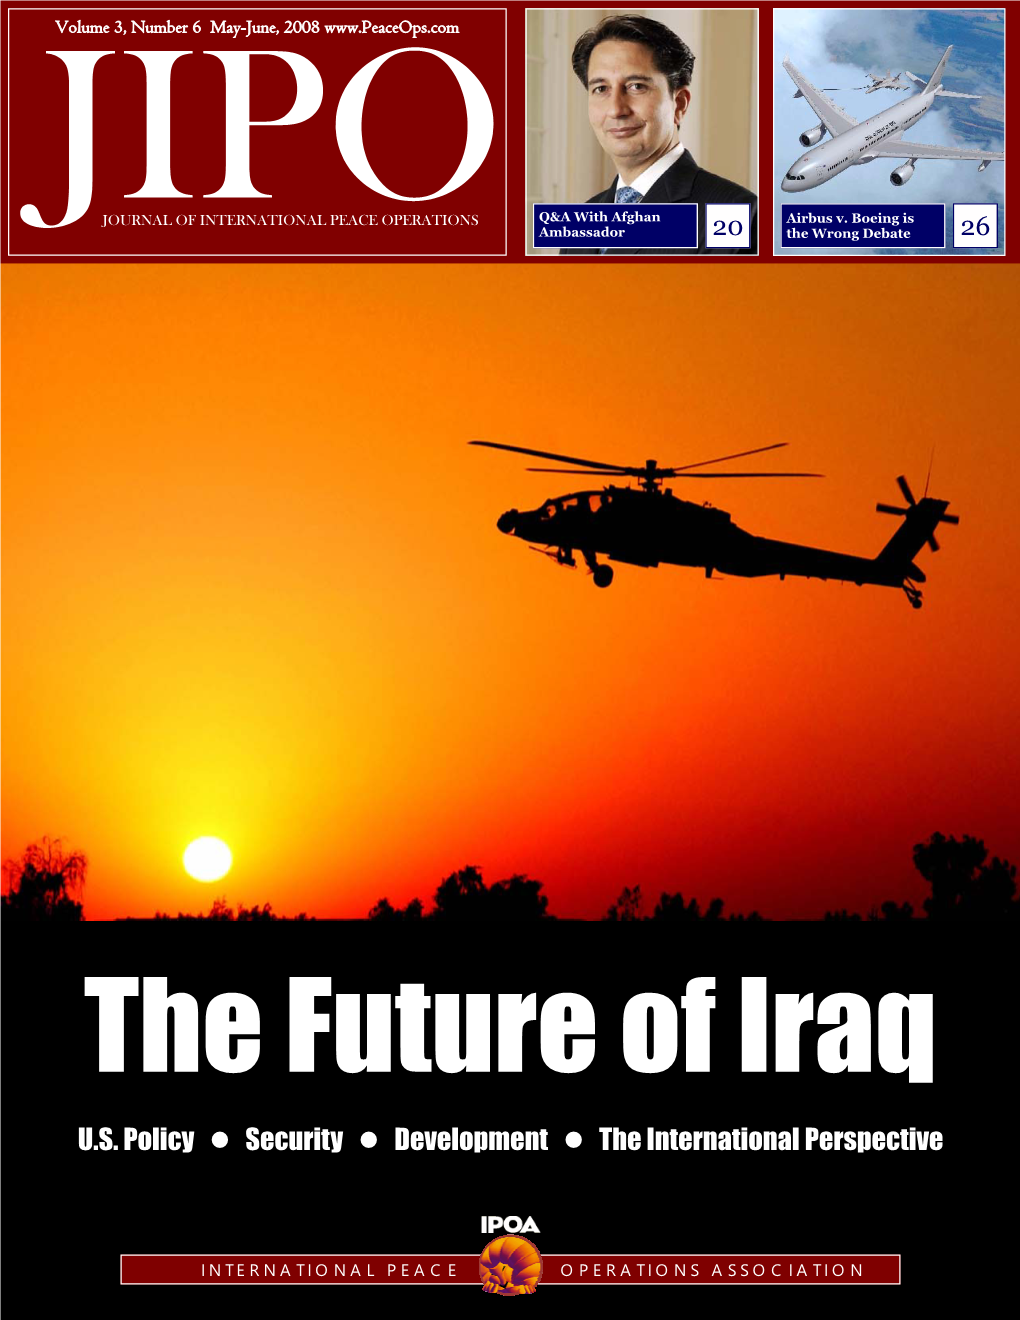 JOURNAL of INTERNATIONAL PEACE OPERATIONS Q&A with Afghan Airbus V